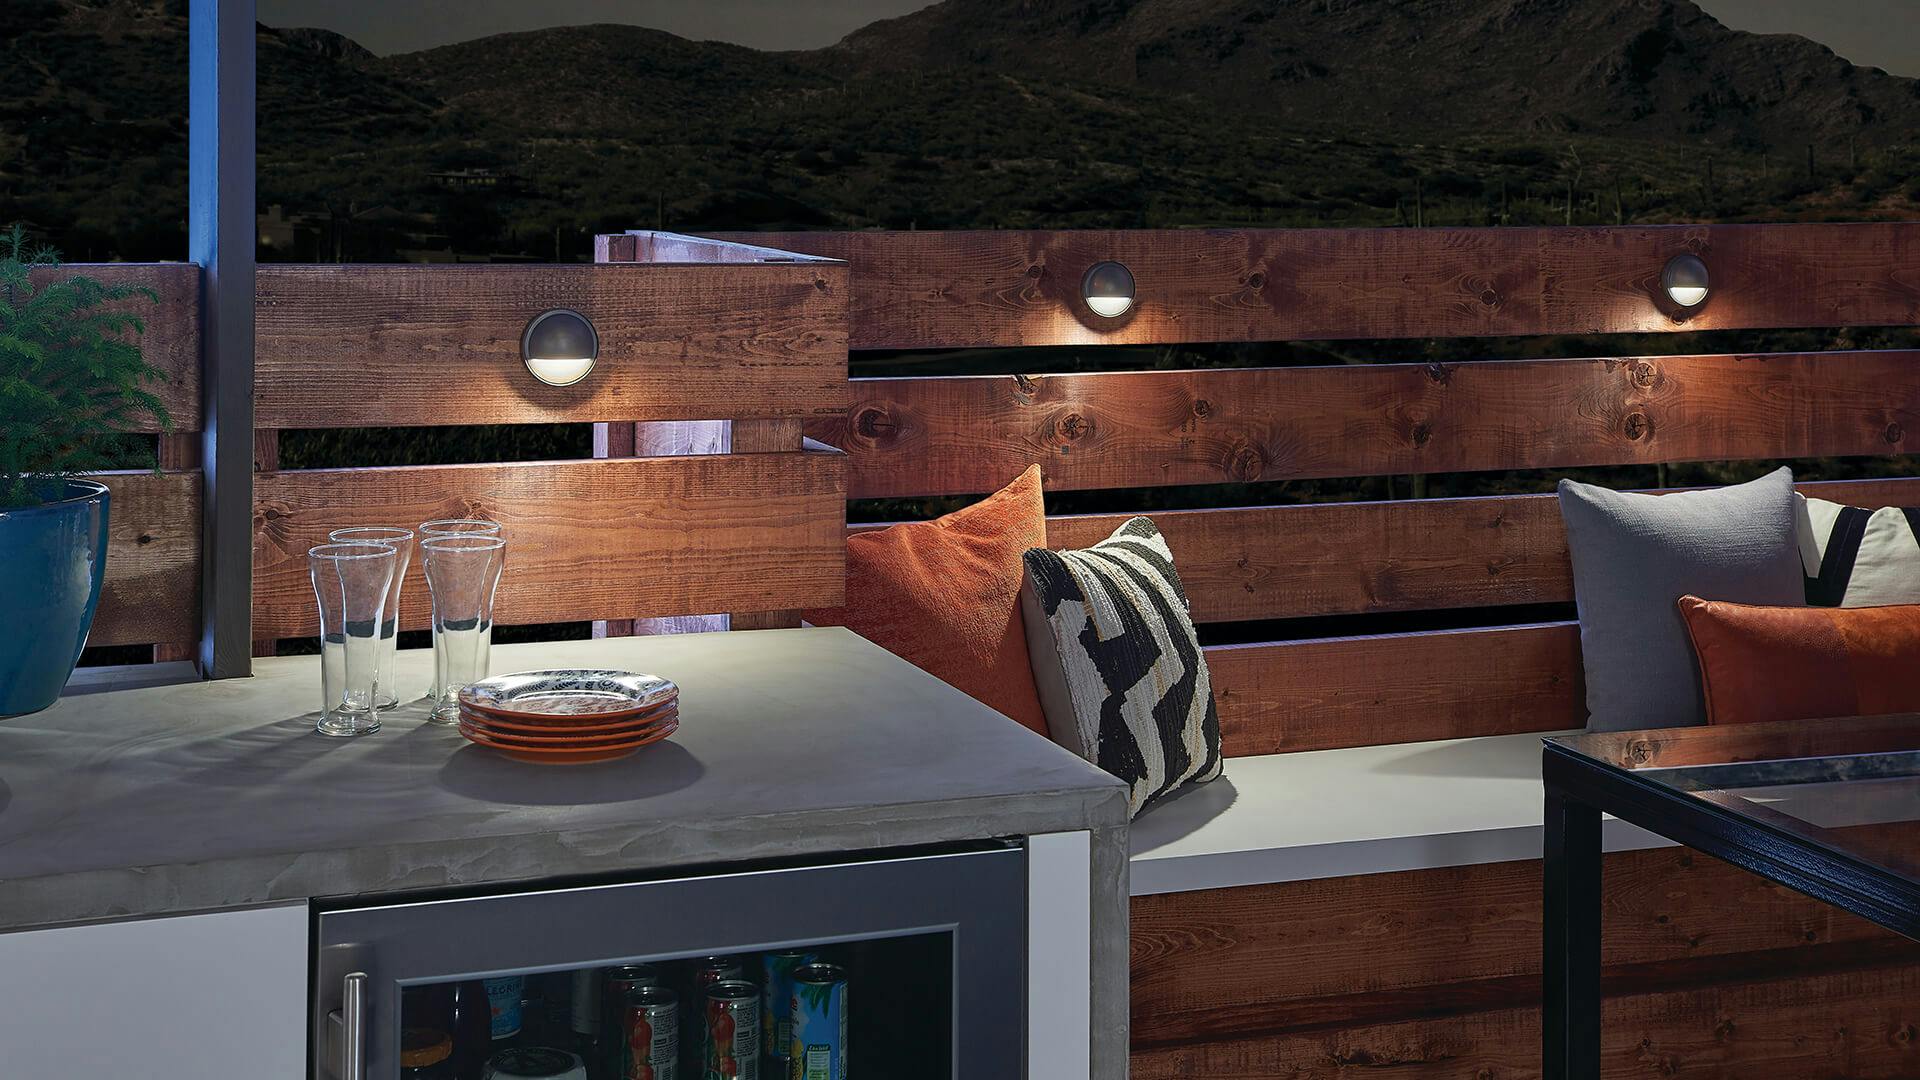 Outdoor kitchen at night with lights spaced out on the fencing